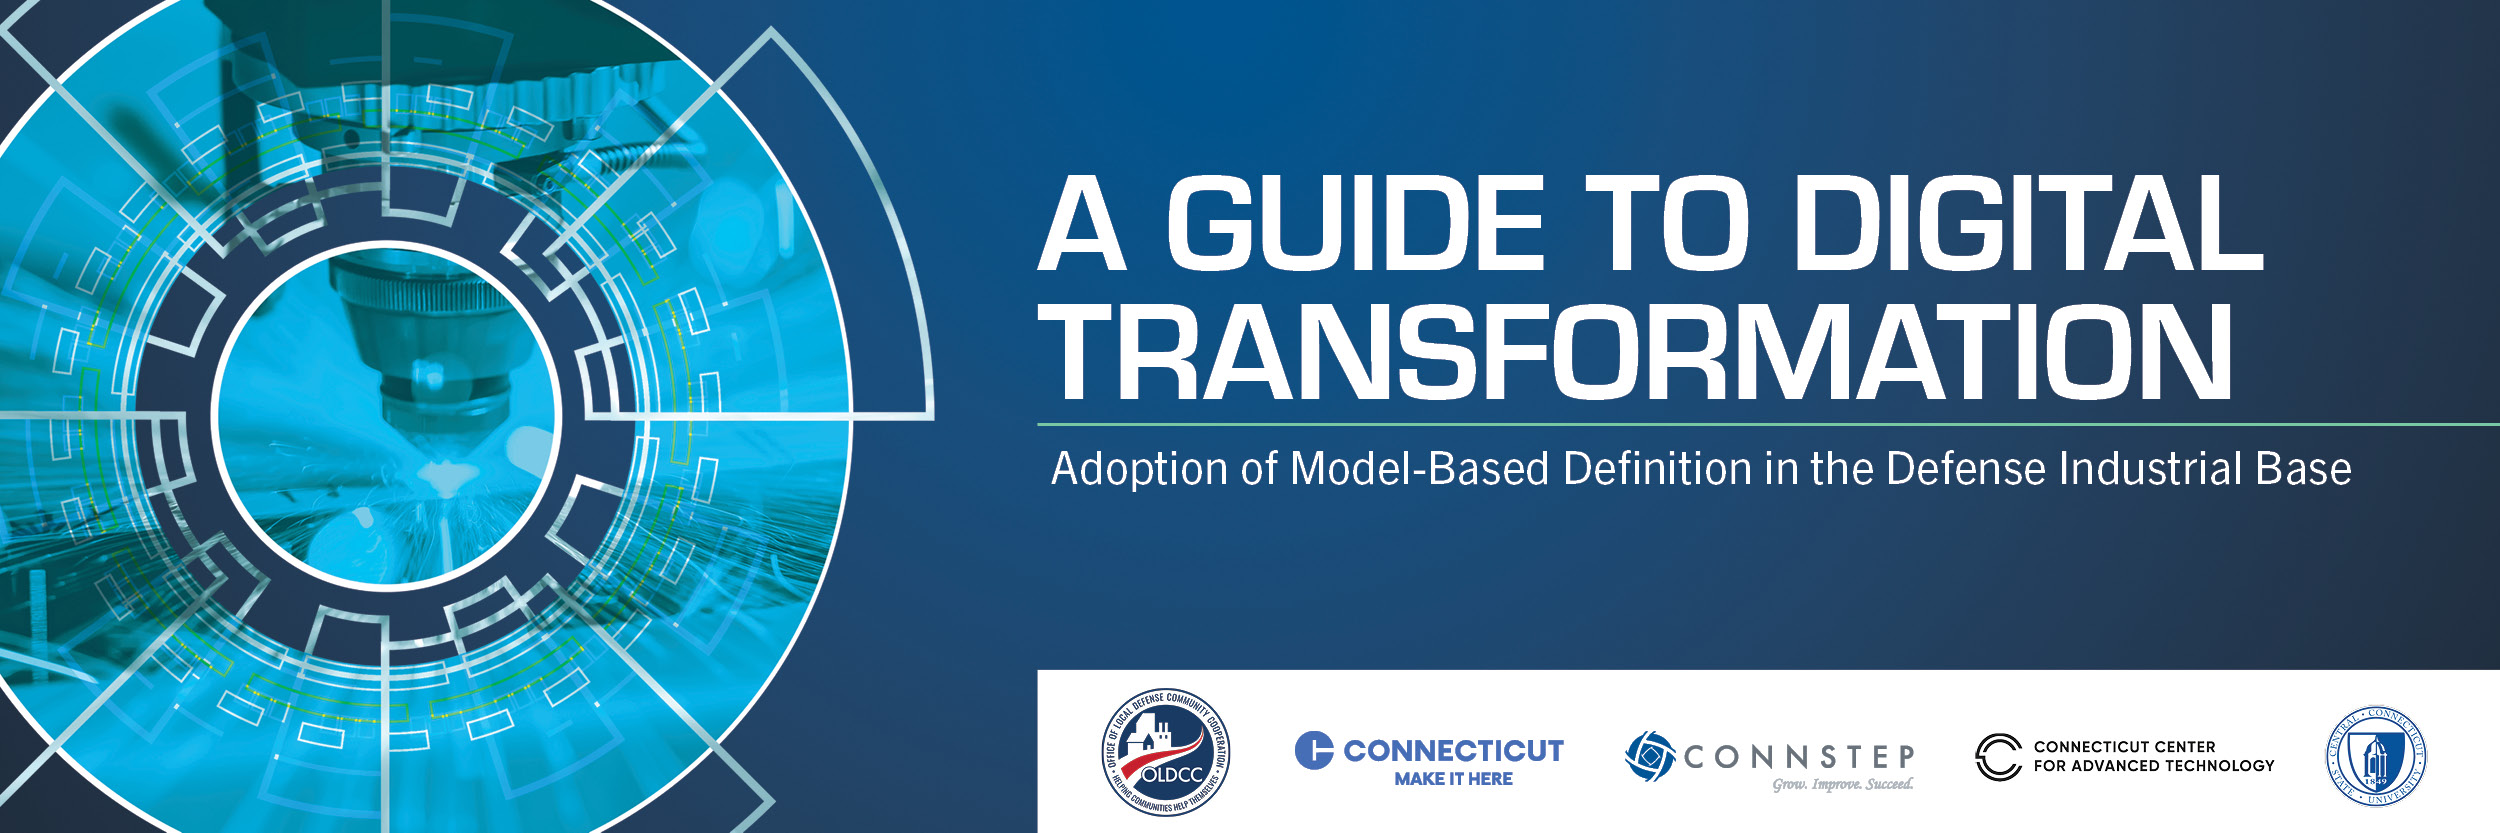 A Guide to Digital Transformation Hosted by CT State Community College Northwestern